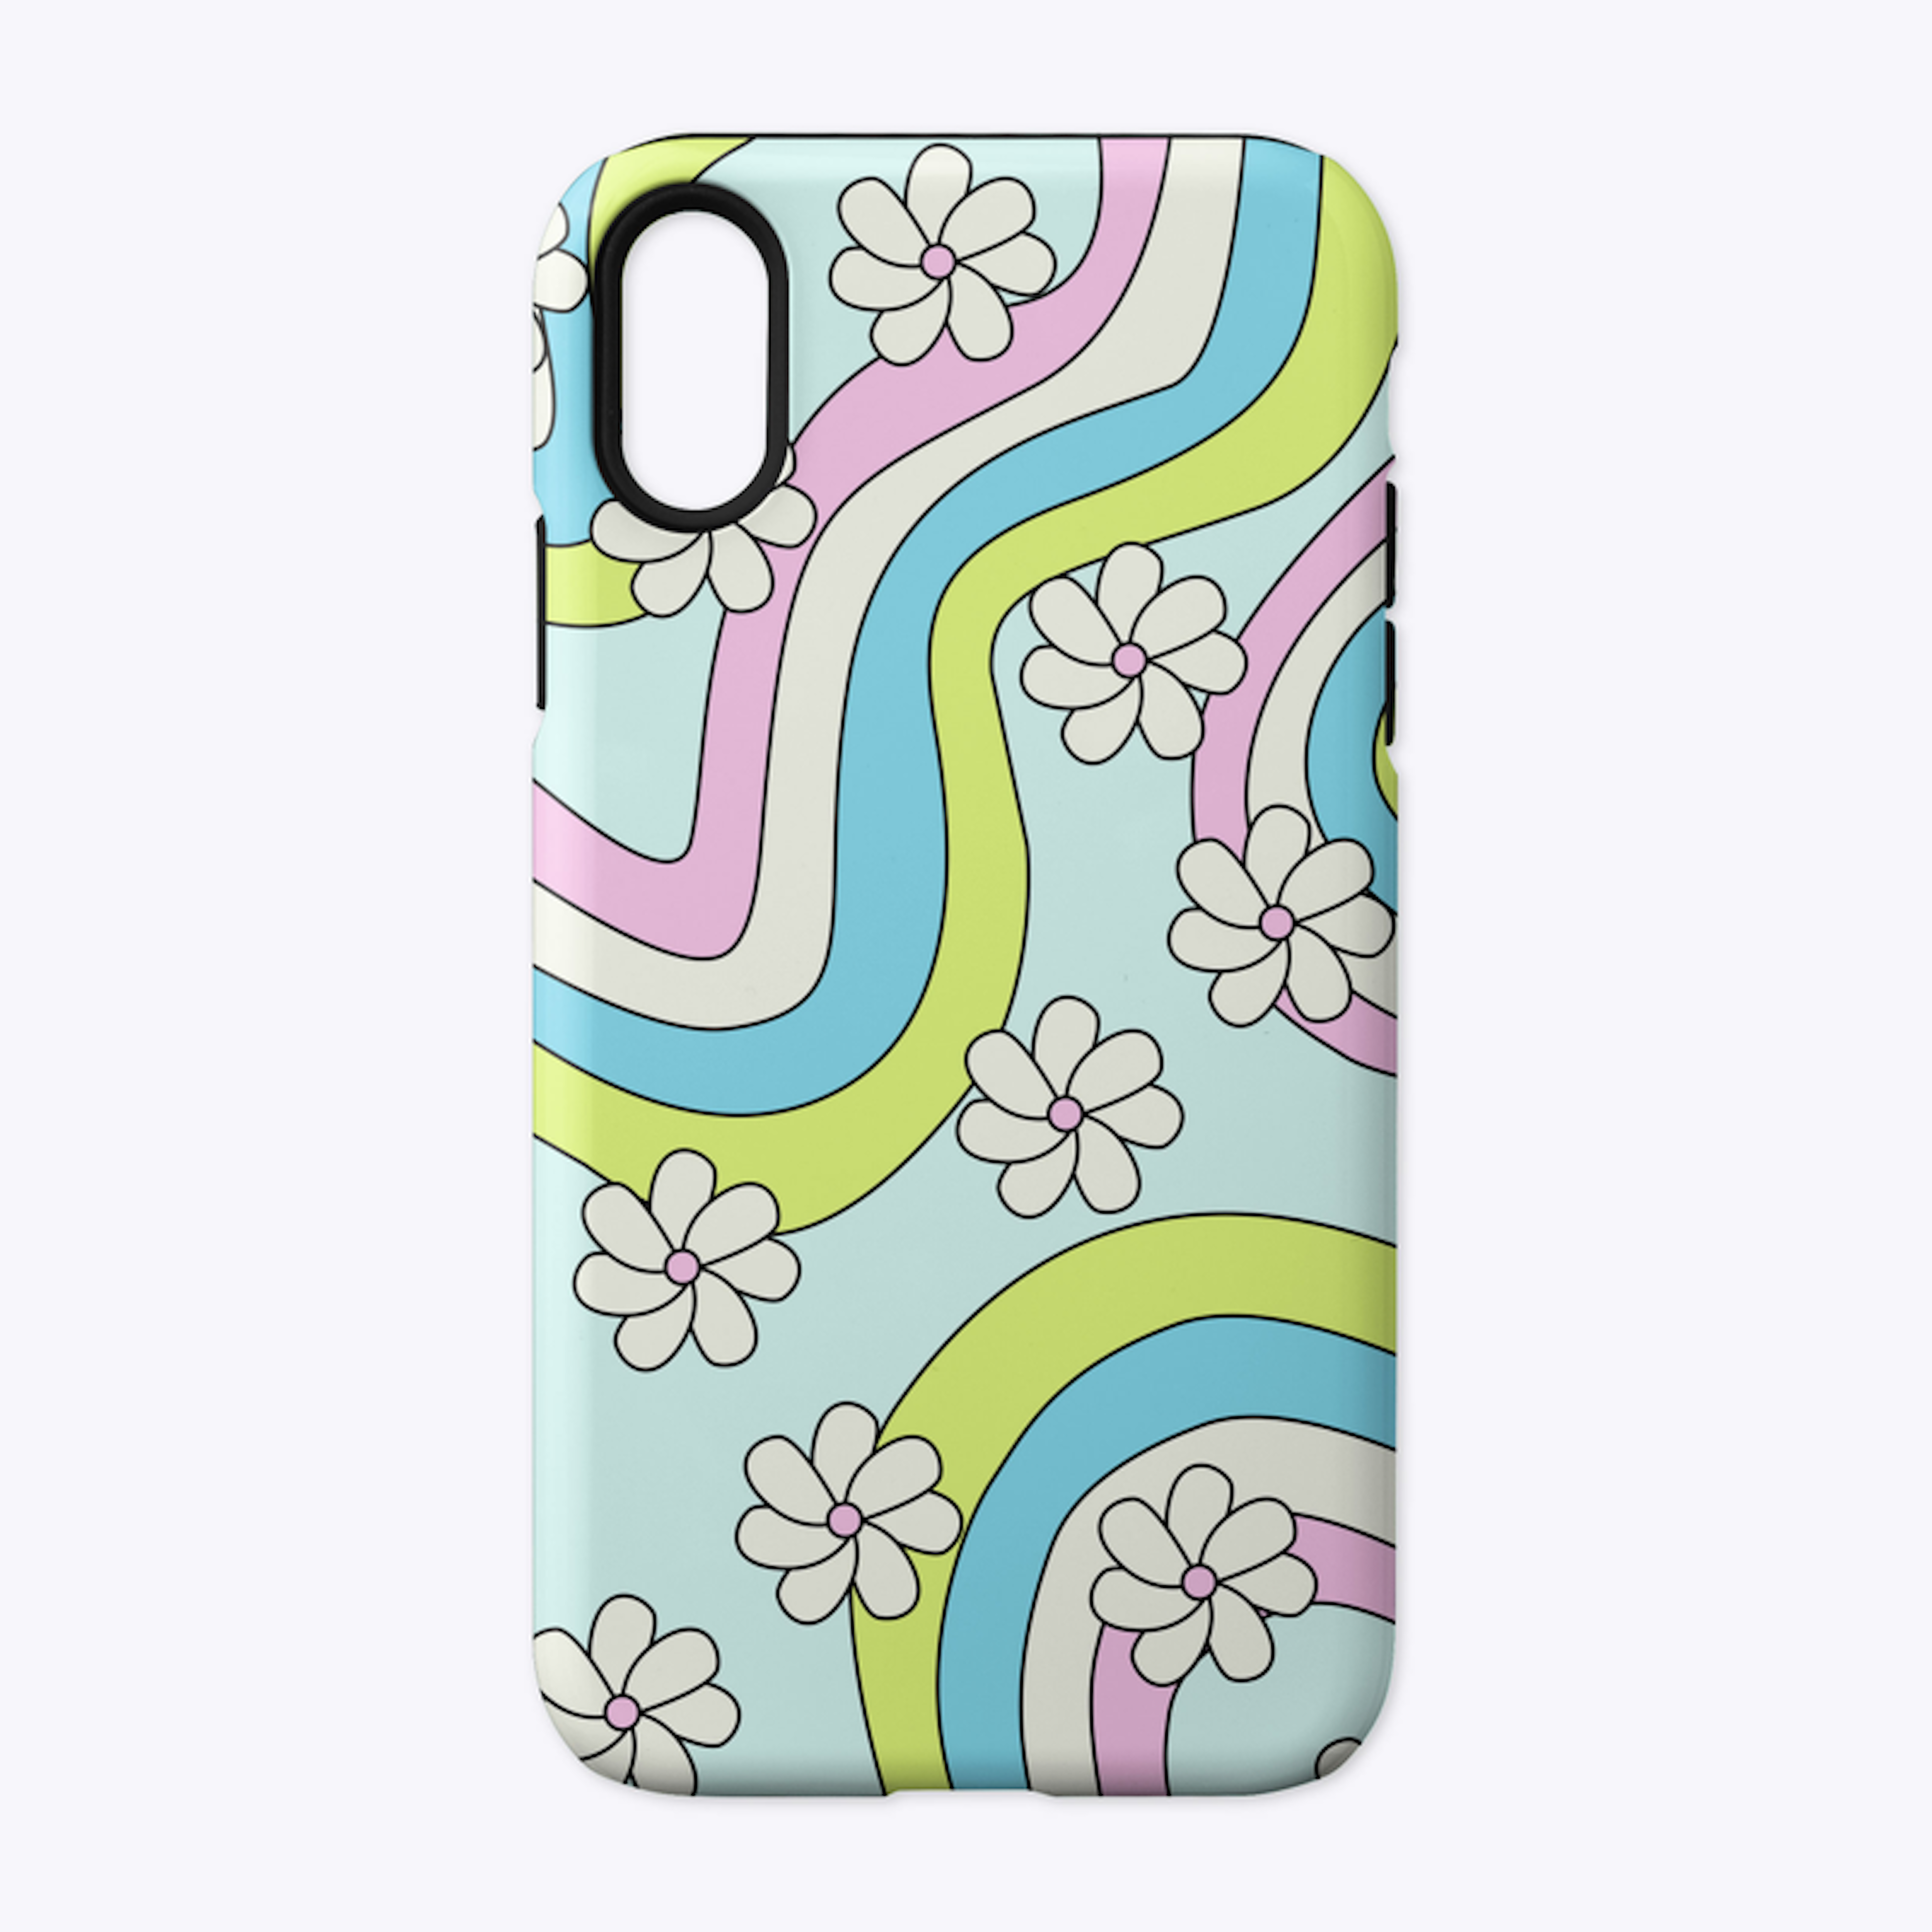 Udderly Psychedelic iPhone Tough Case